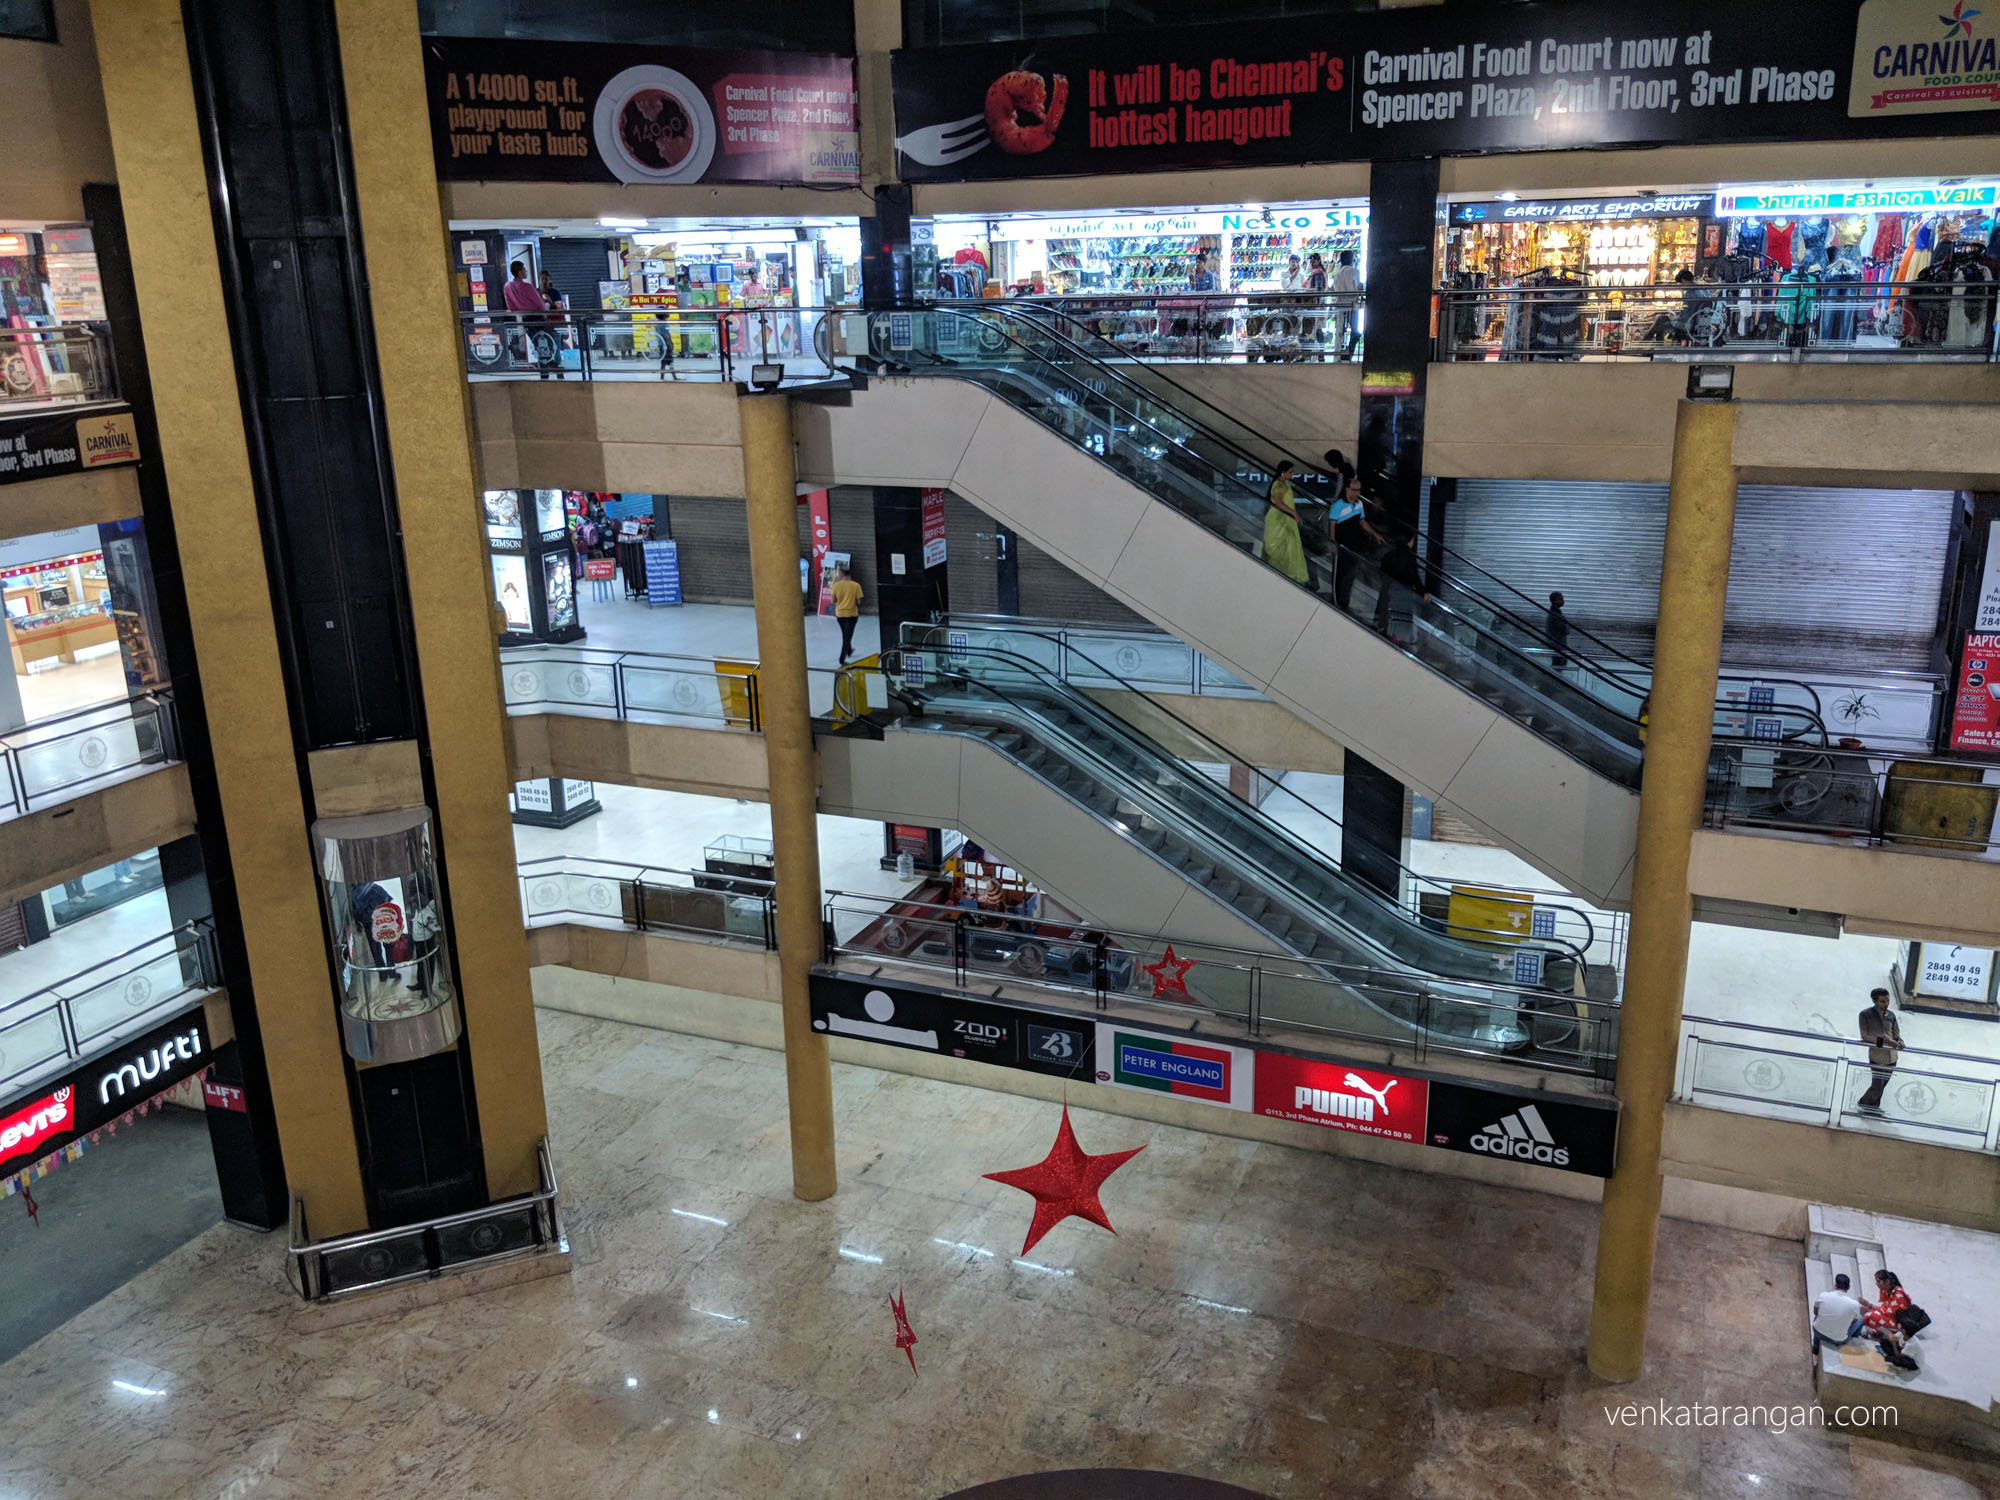 Many brands and outlets have exited the mall